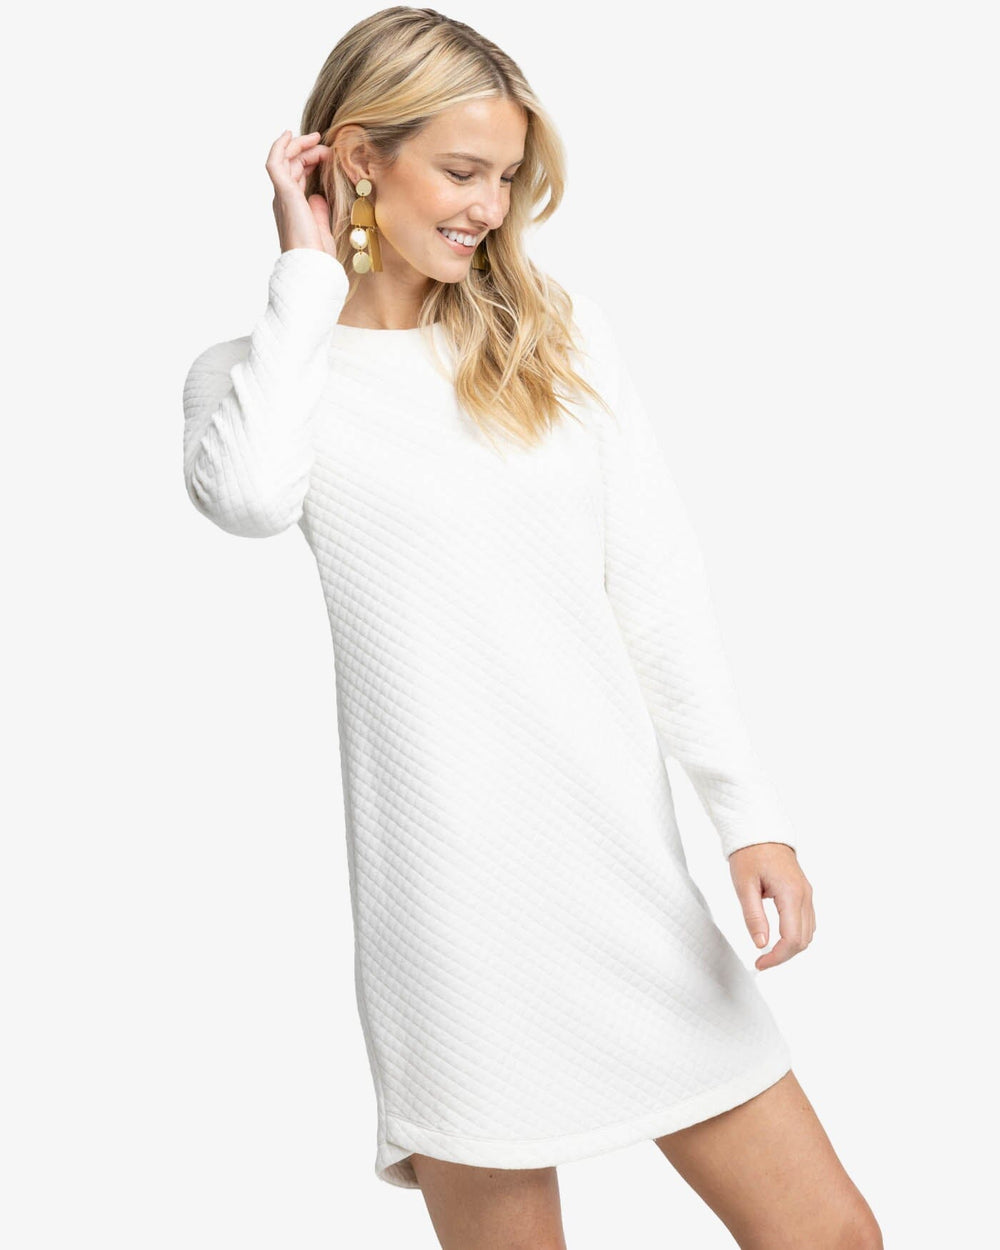 The front view of the Southern Tide Milani Texture Dress by Southern Tide - Marshmallow